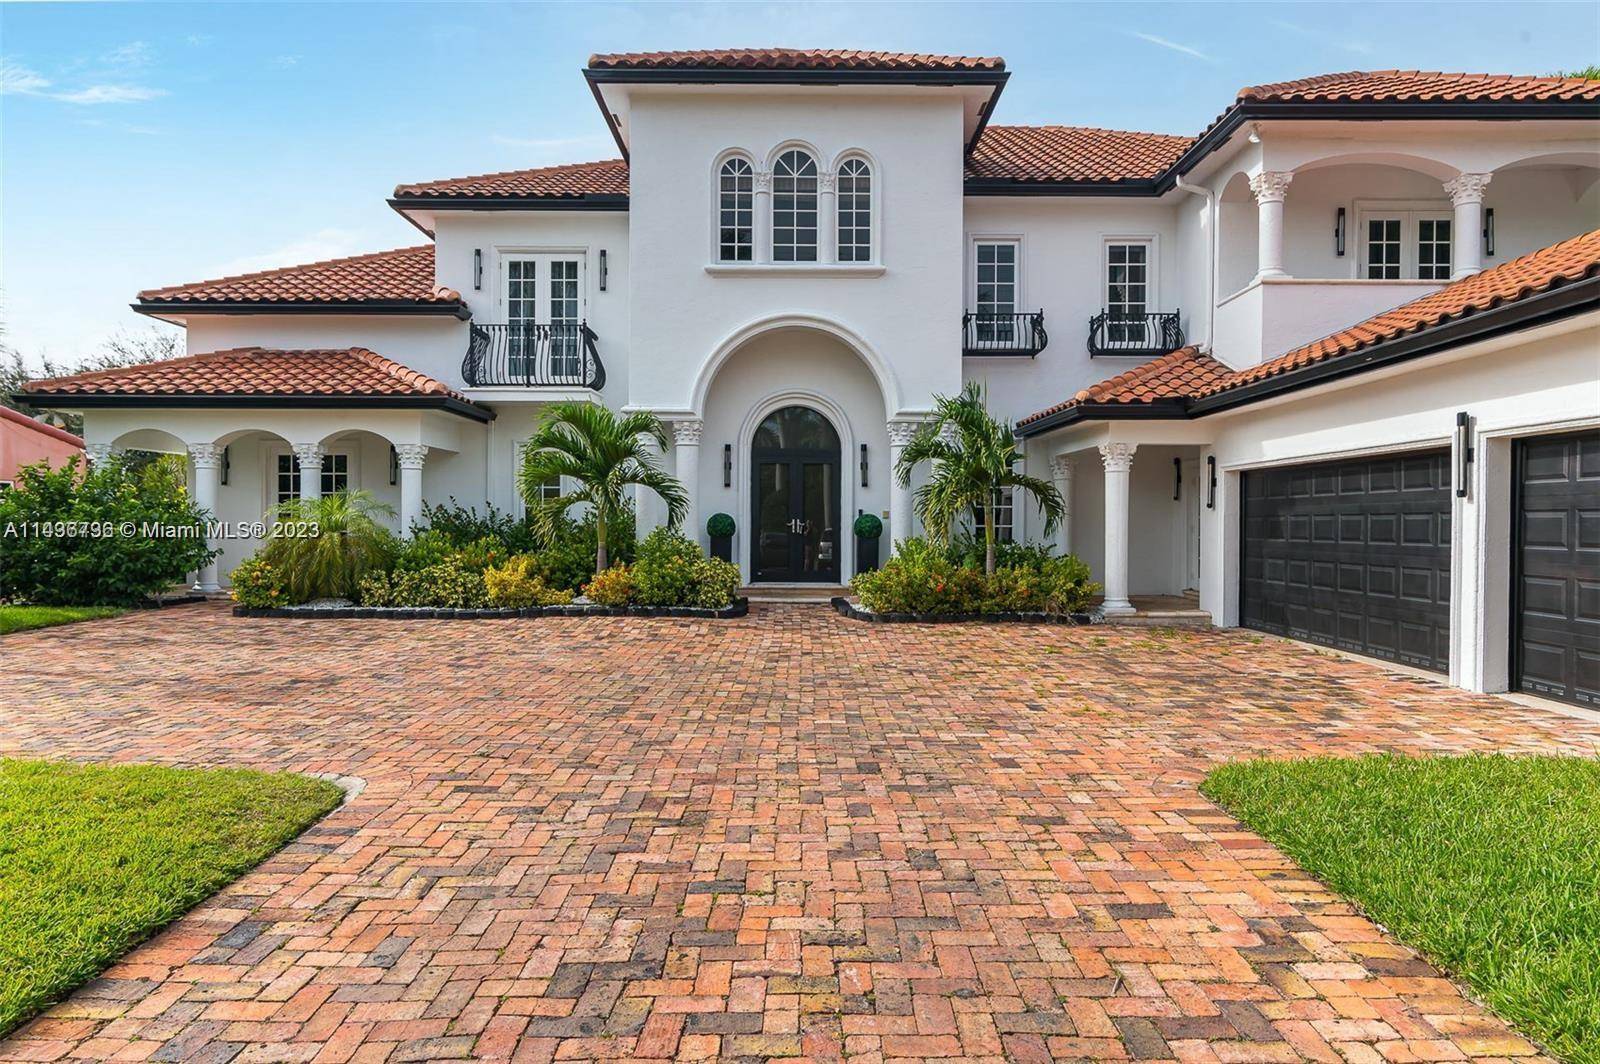 REDUCE MAGNIFICIENT WATERFRONT GATED ESTATE ON 1 3 OF AN ACRE LOT IN PRESTIGIOUS EAST CORAL RIDGE IN SOUGHT AFTER BAYVIEW SCHOOL DISTRICT.